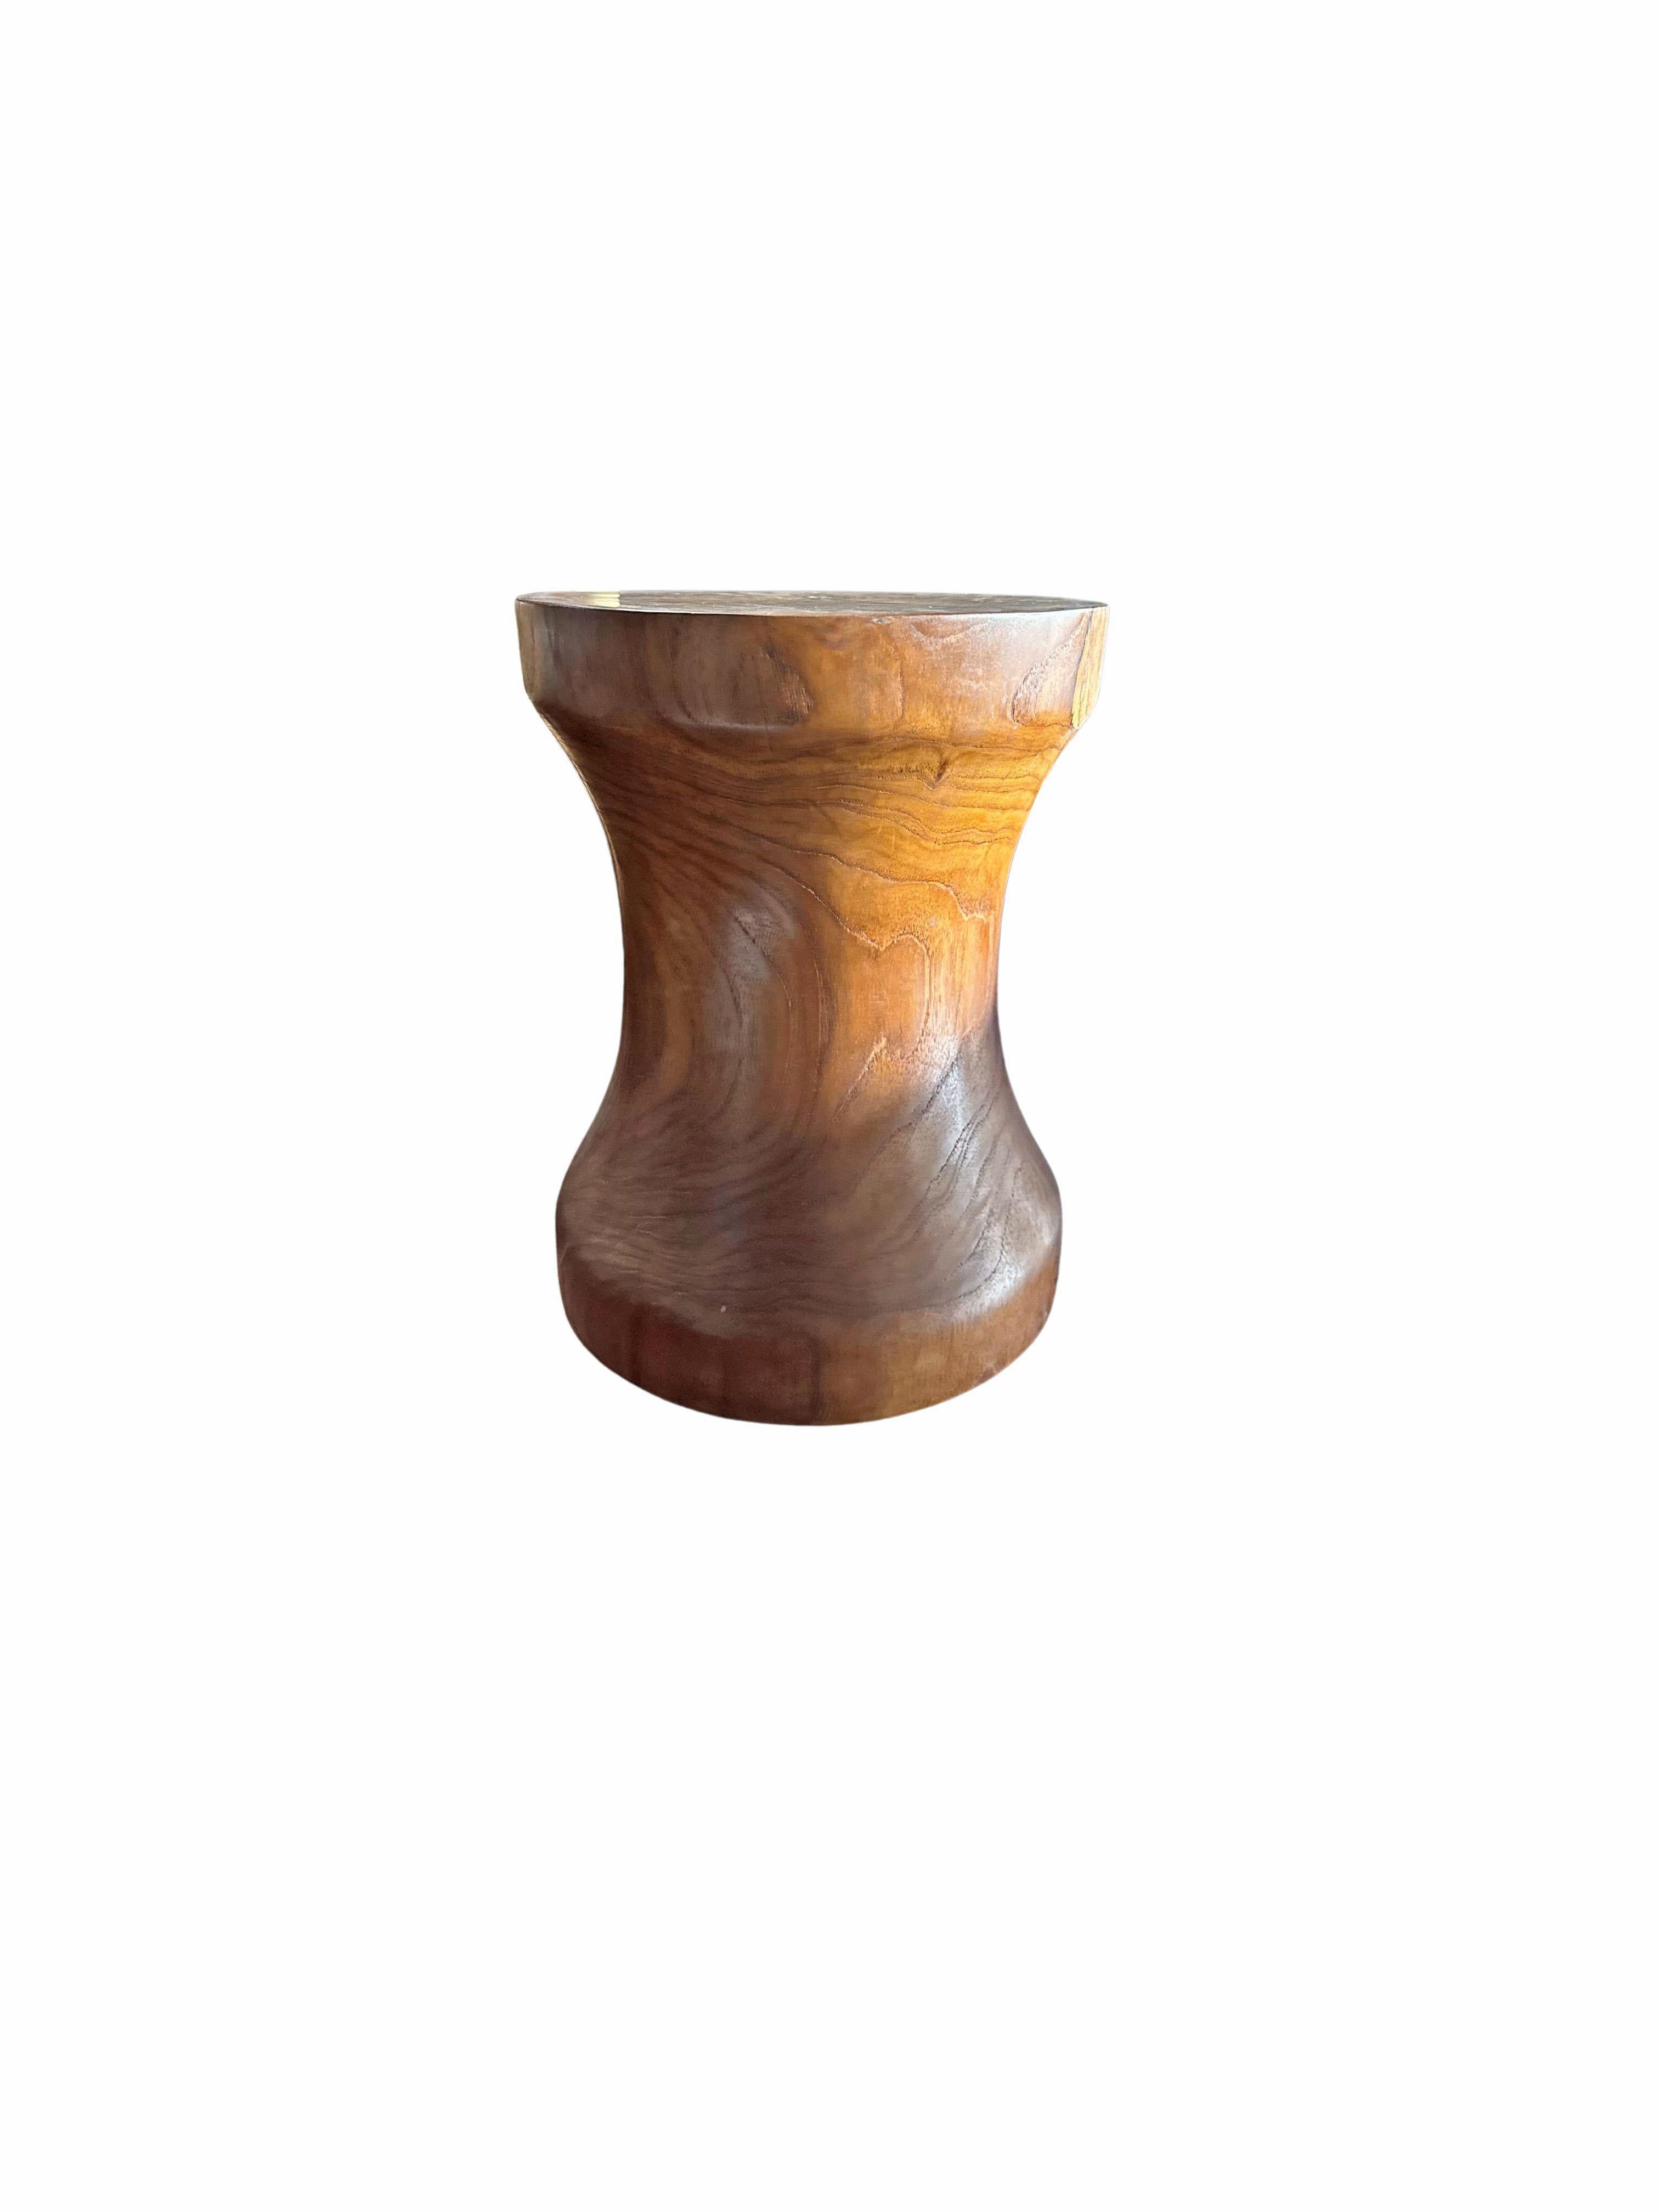 Hand-Crafted Sculptural Teak Wood Side Table, with Stunning Wood Textures, Modern Organic For Sale